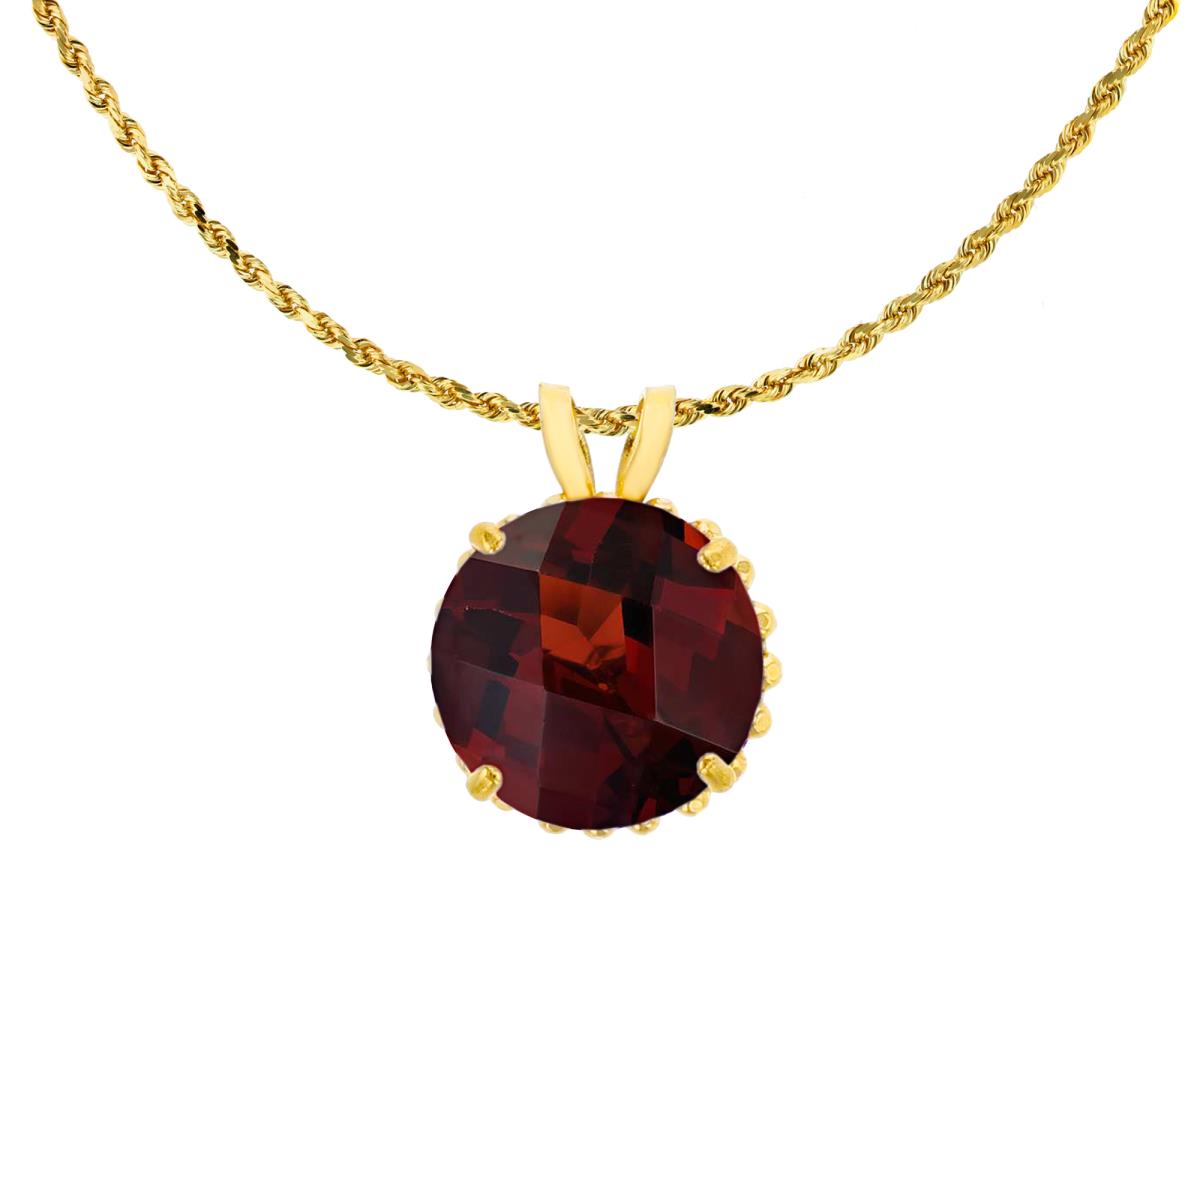 14K Yellow Gold 7mm Rd Cut Garnet with Bead Frame Rabbit Ear 18" Rope Chain Necklace